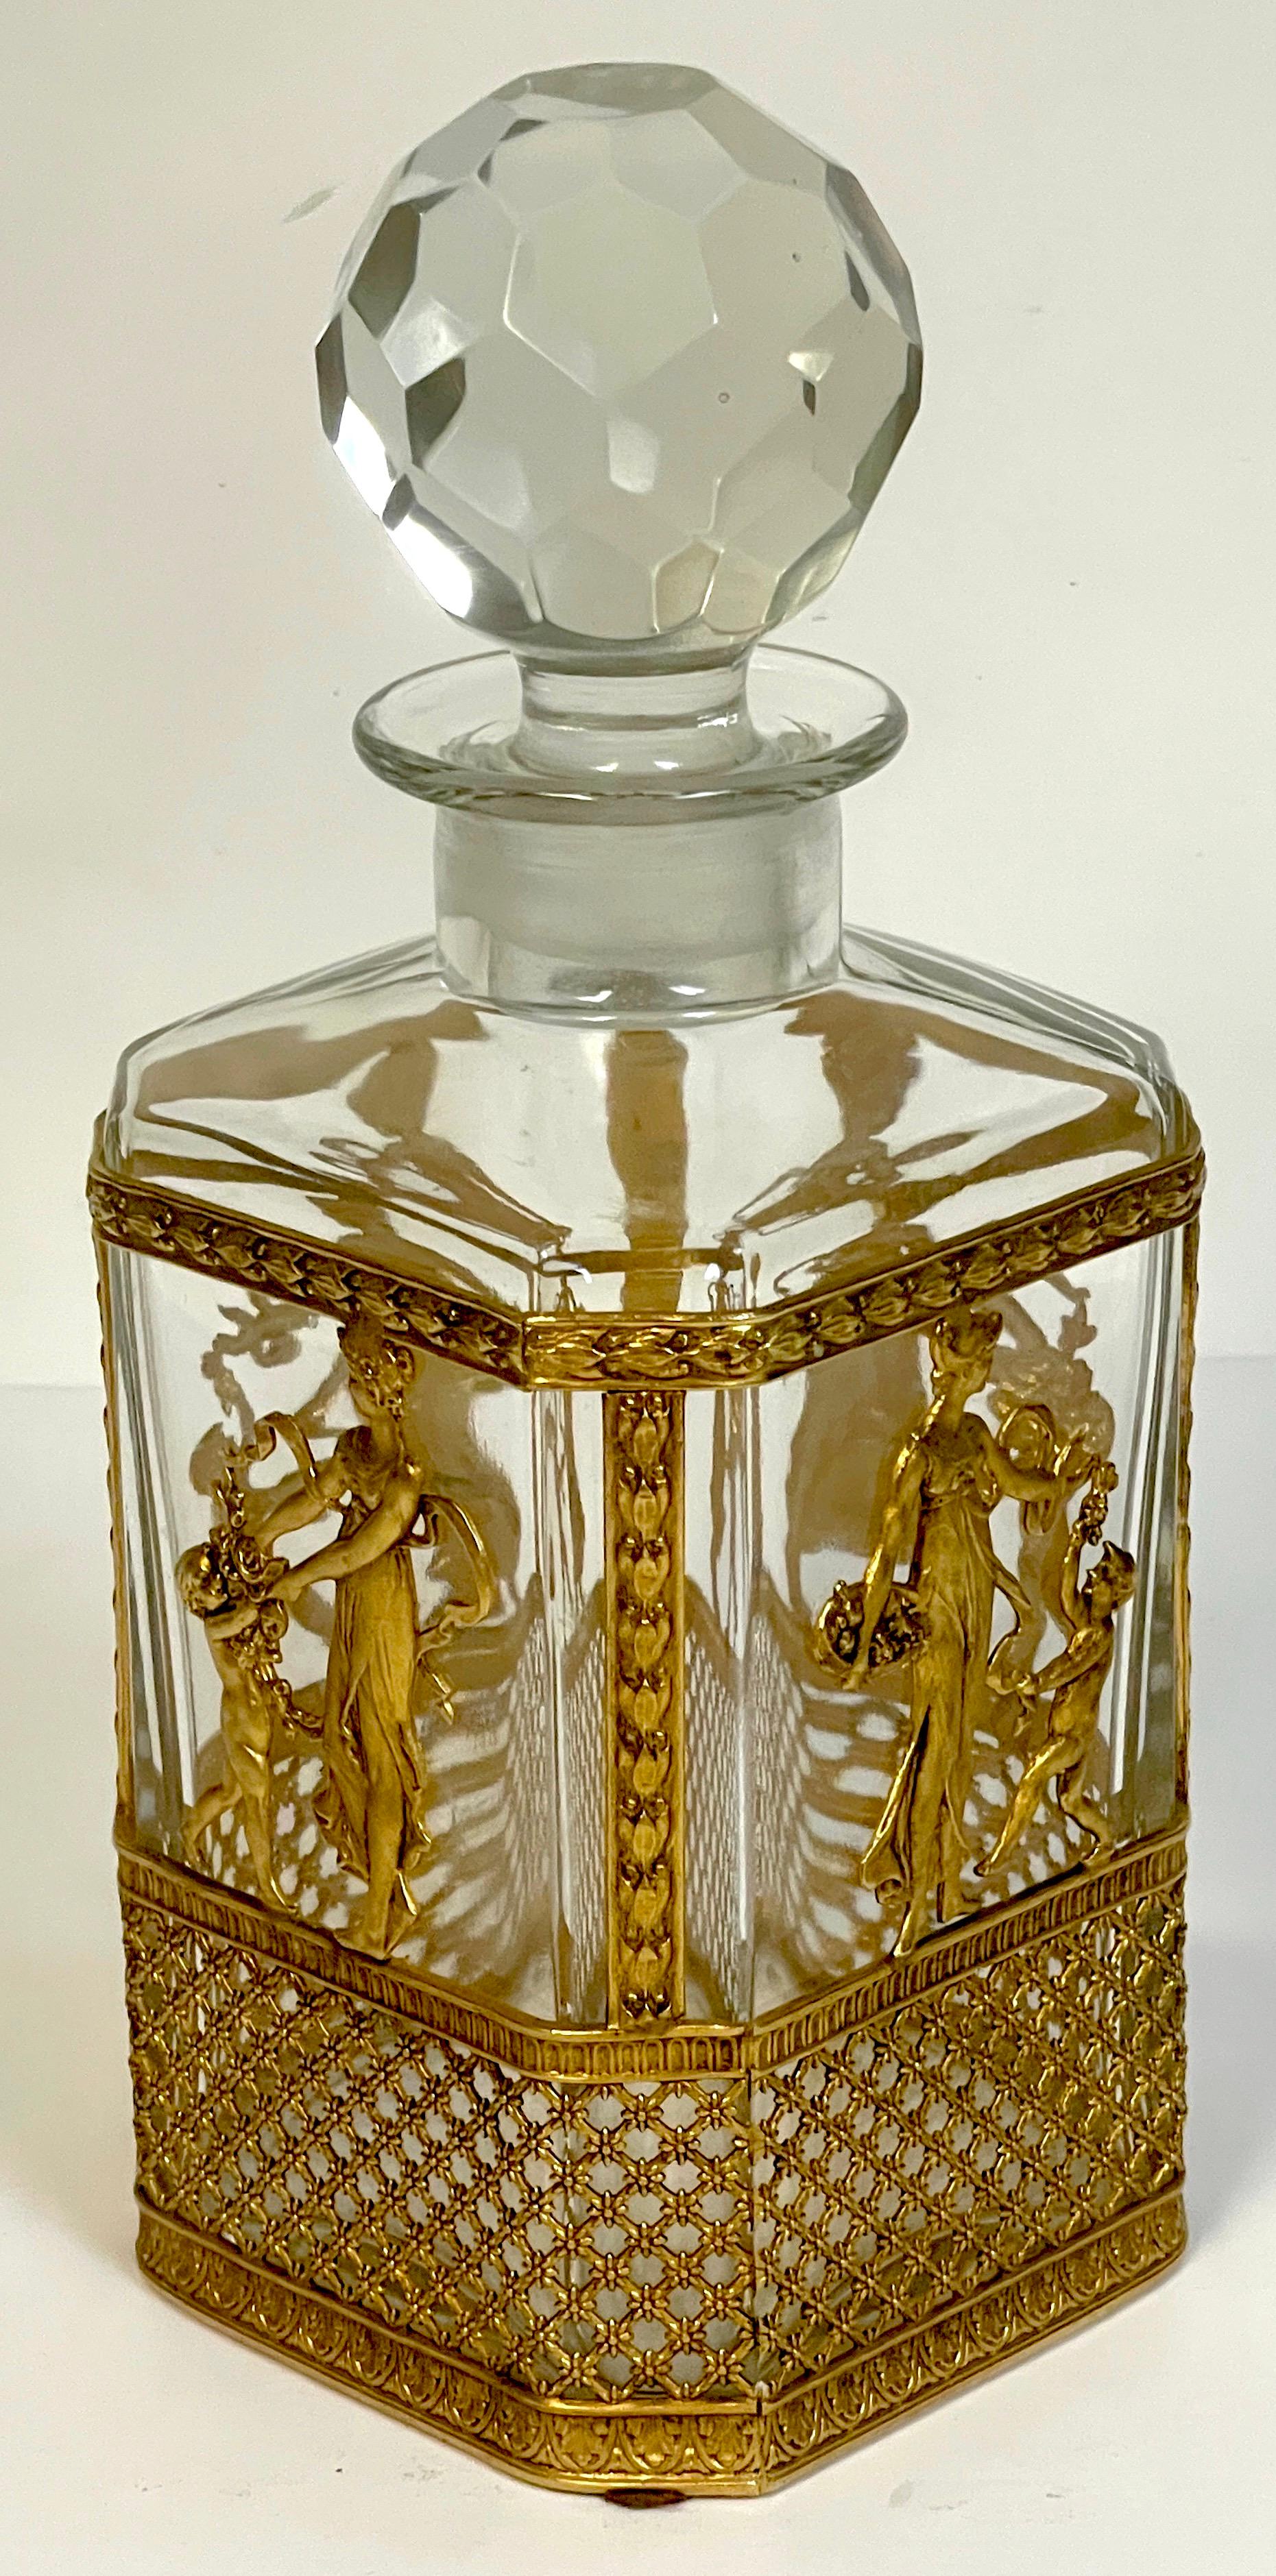 Empire Baccarat Style Ormolu Mounted Decanter, An exquisite example, with faceted stopper, the bottle fitted with a finely cast and gilt four panel allegorical classical vignettes. Standing 10-Inches high with a 4-inch square diameter. Unmarked.